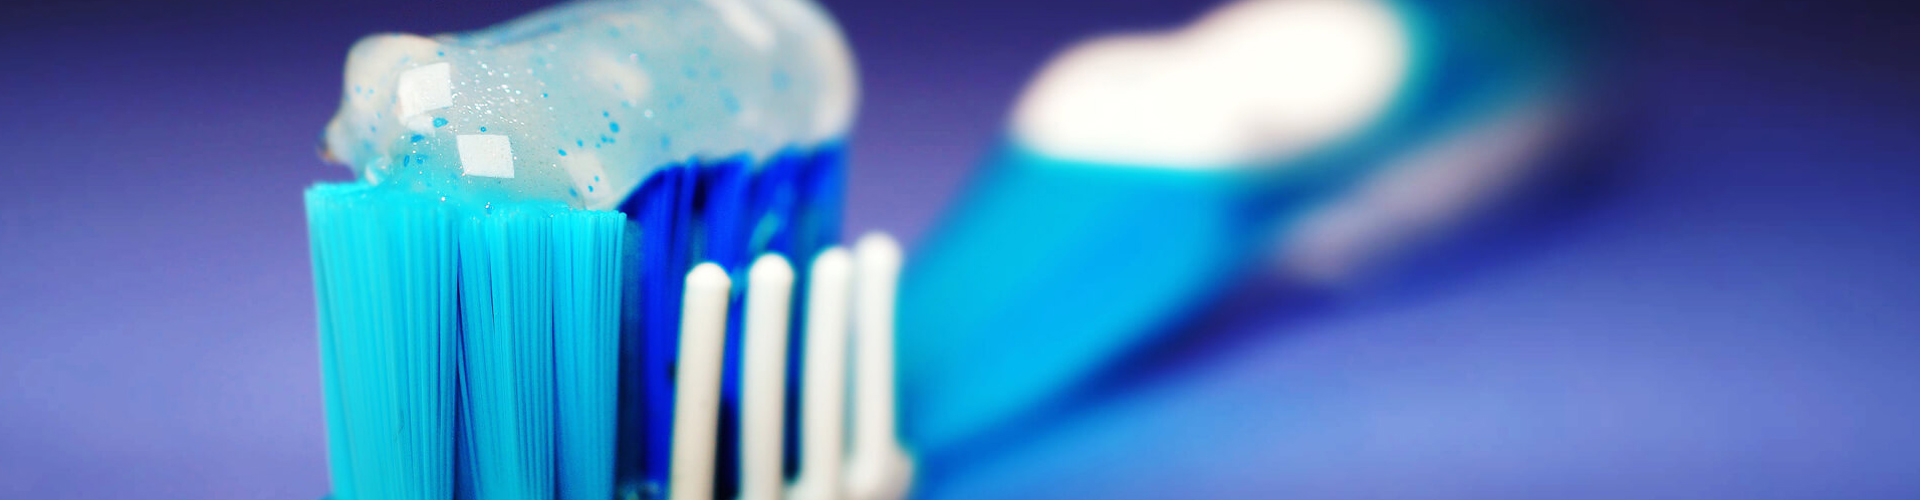 Blue and White Toothbrush with Mint Toothpaste